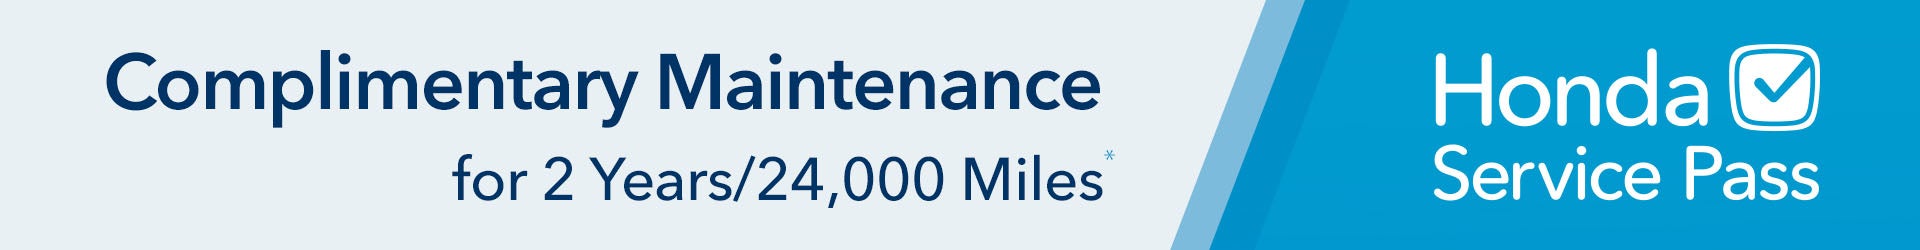 Complimentary Maintenance for 2 years / 24,000 Miles Honda Service Pass | Garden State Honda in Clifton NJ